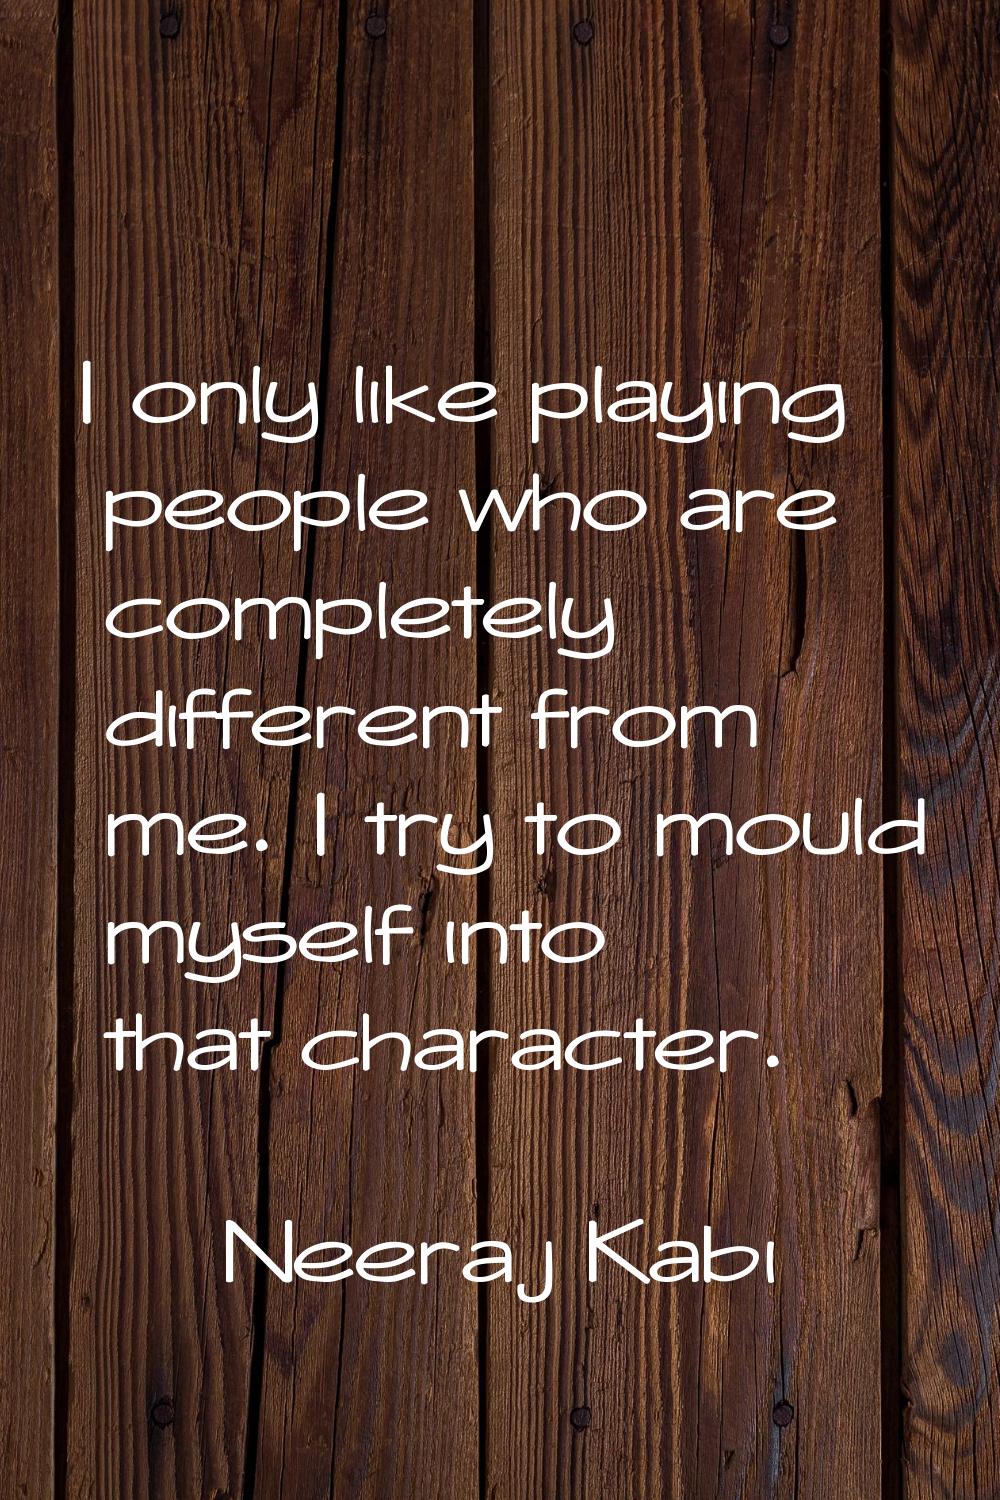 I only like playing people who are completely different from me. I try to mould myself into that ch